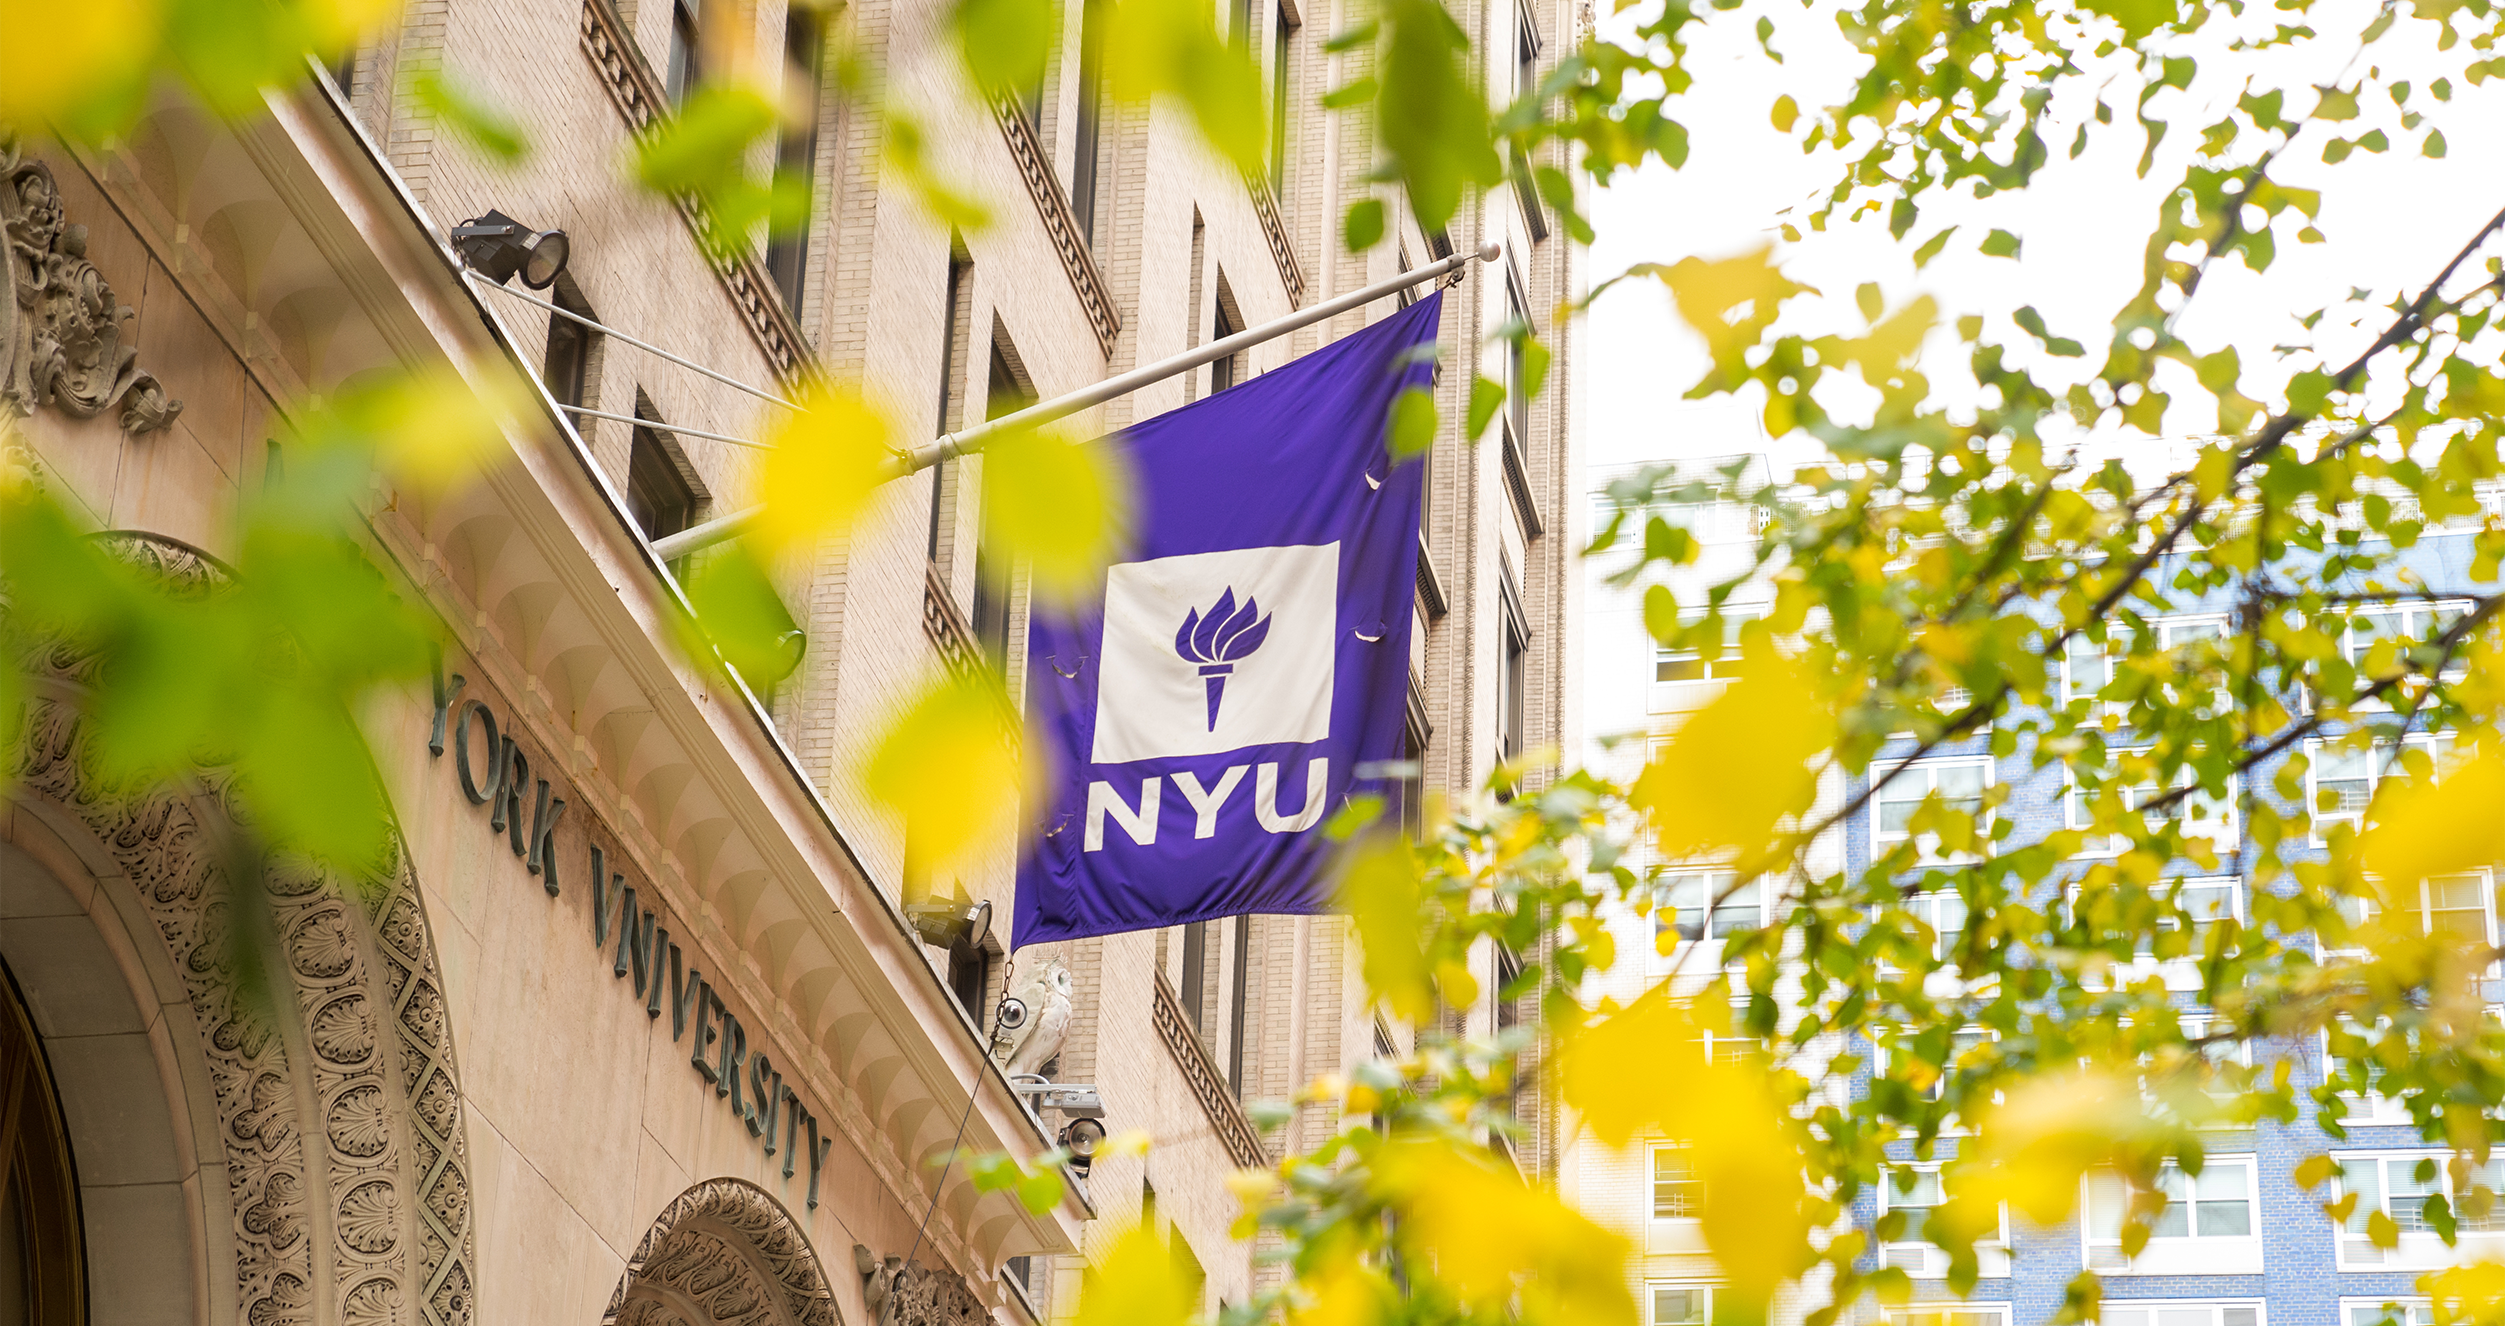 nyu flag outside with tree branches